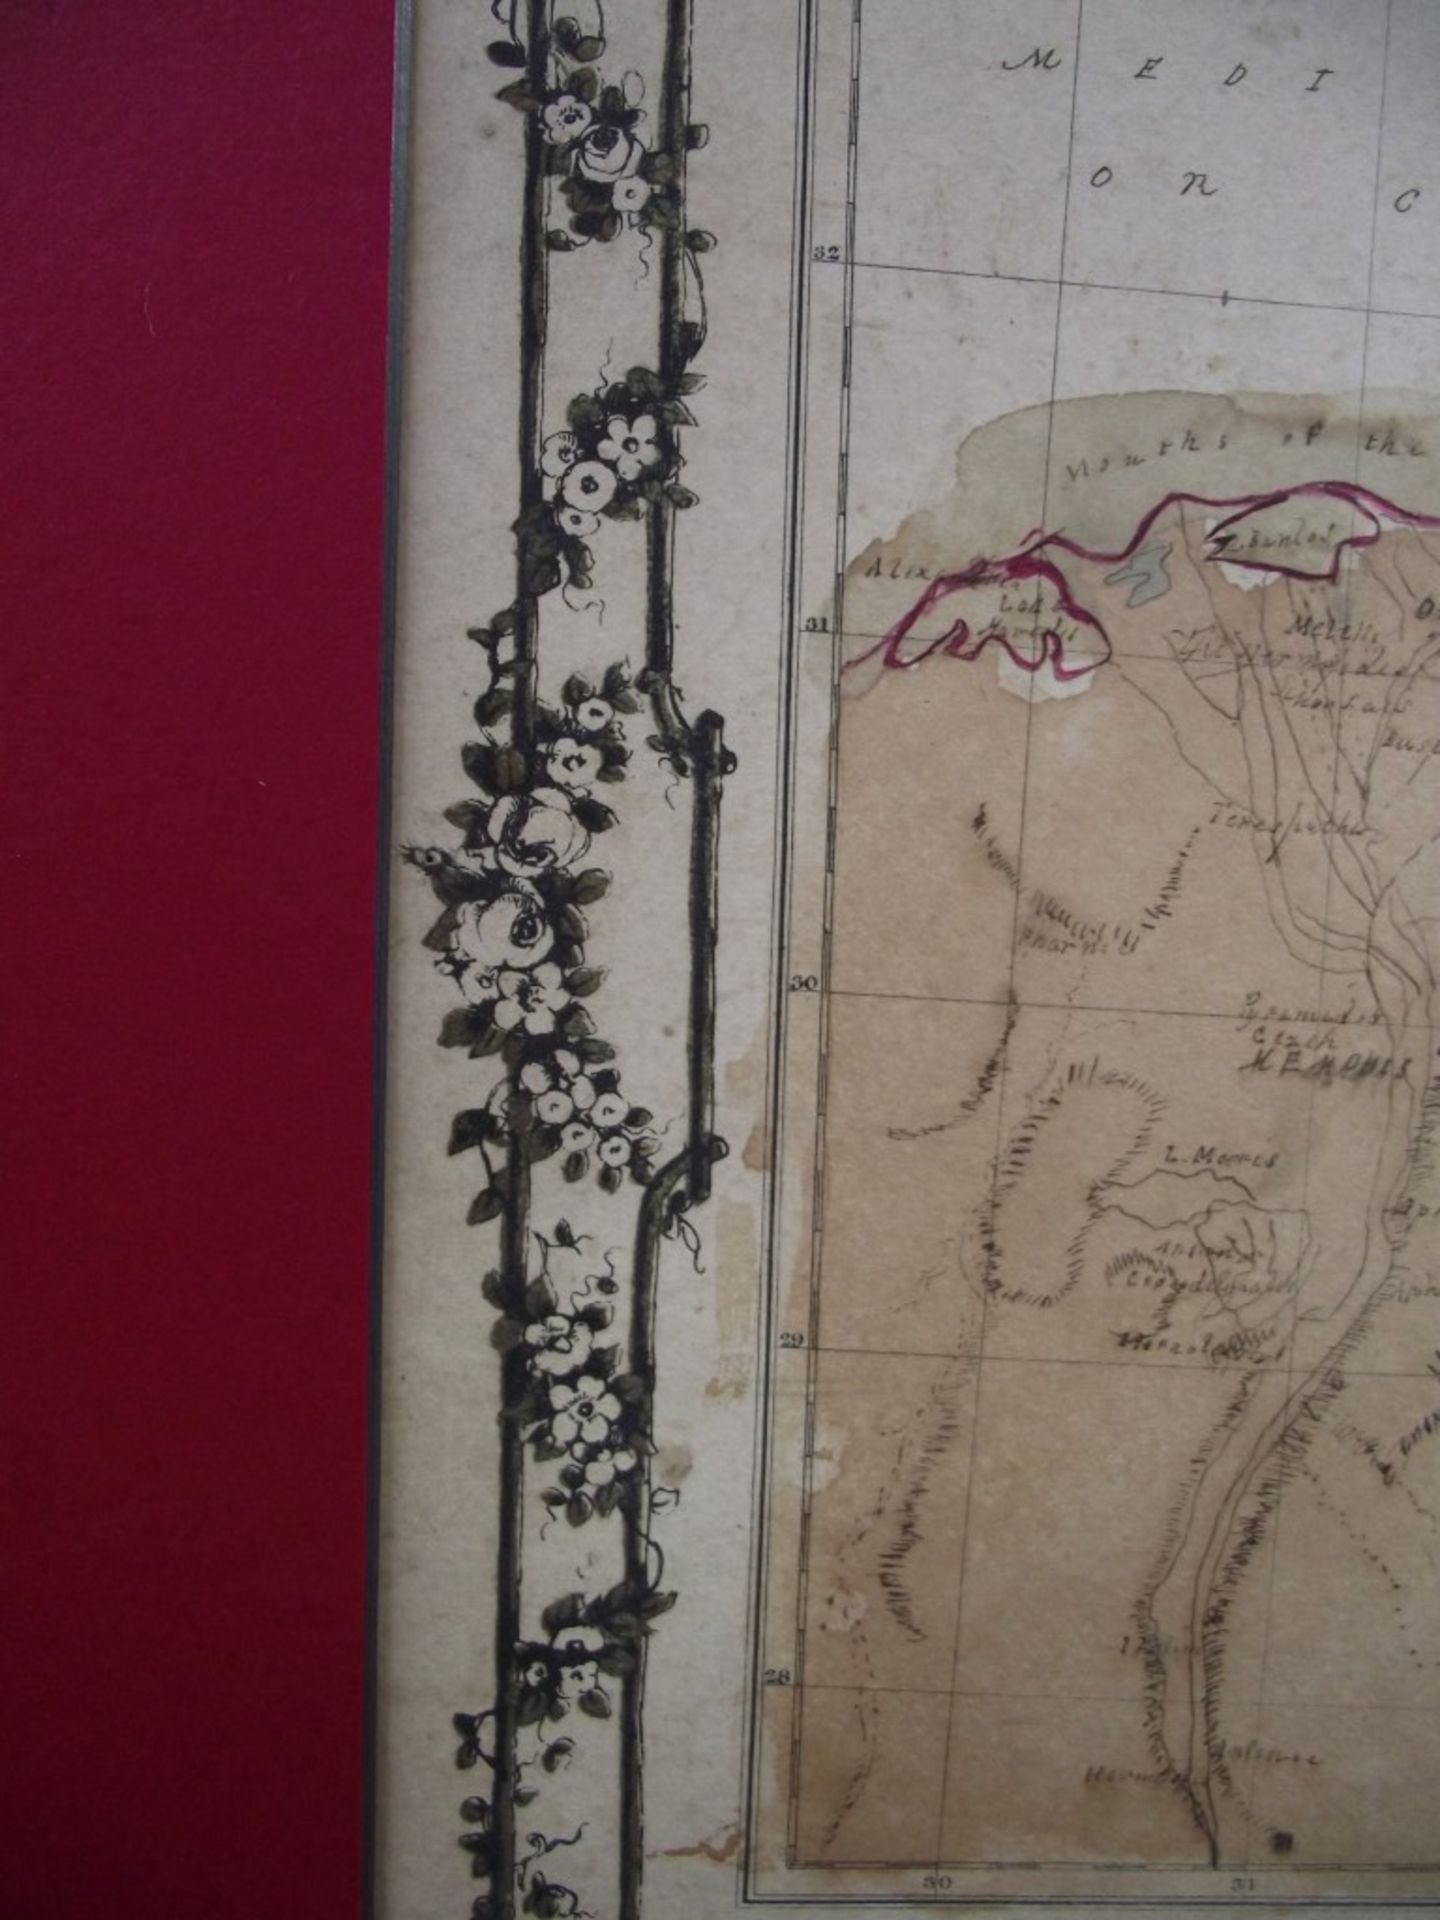 2 x 19th Century Hand Drawn Maps - Signed & Dated By Jane Edwards 1860 - Image 21 of 34